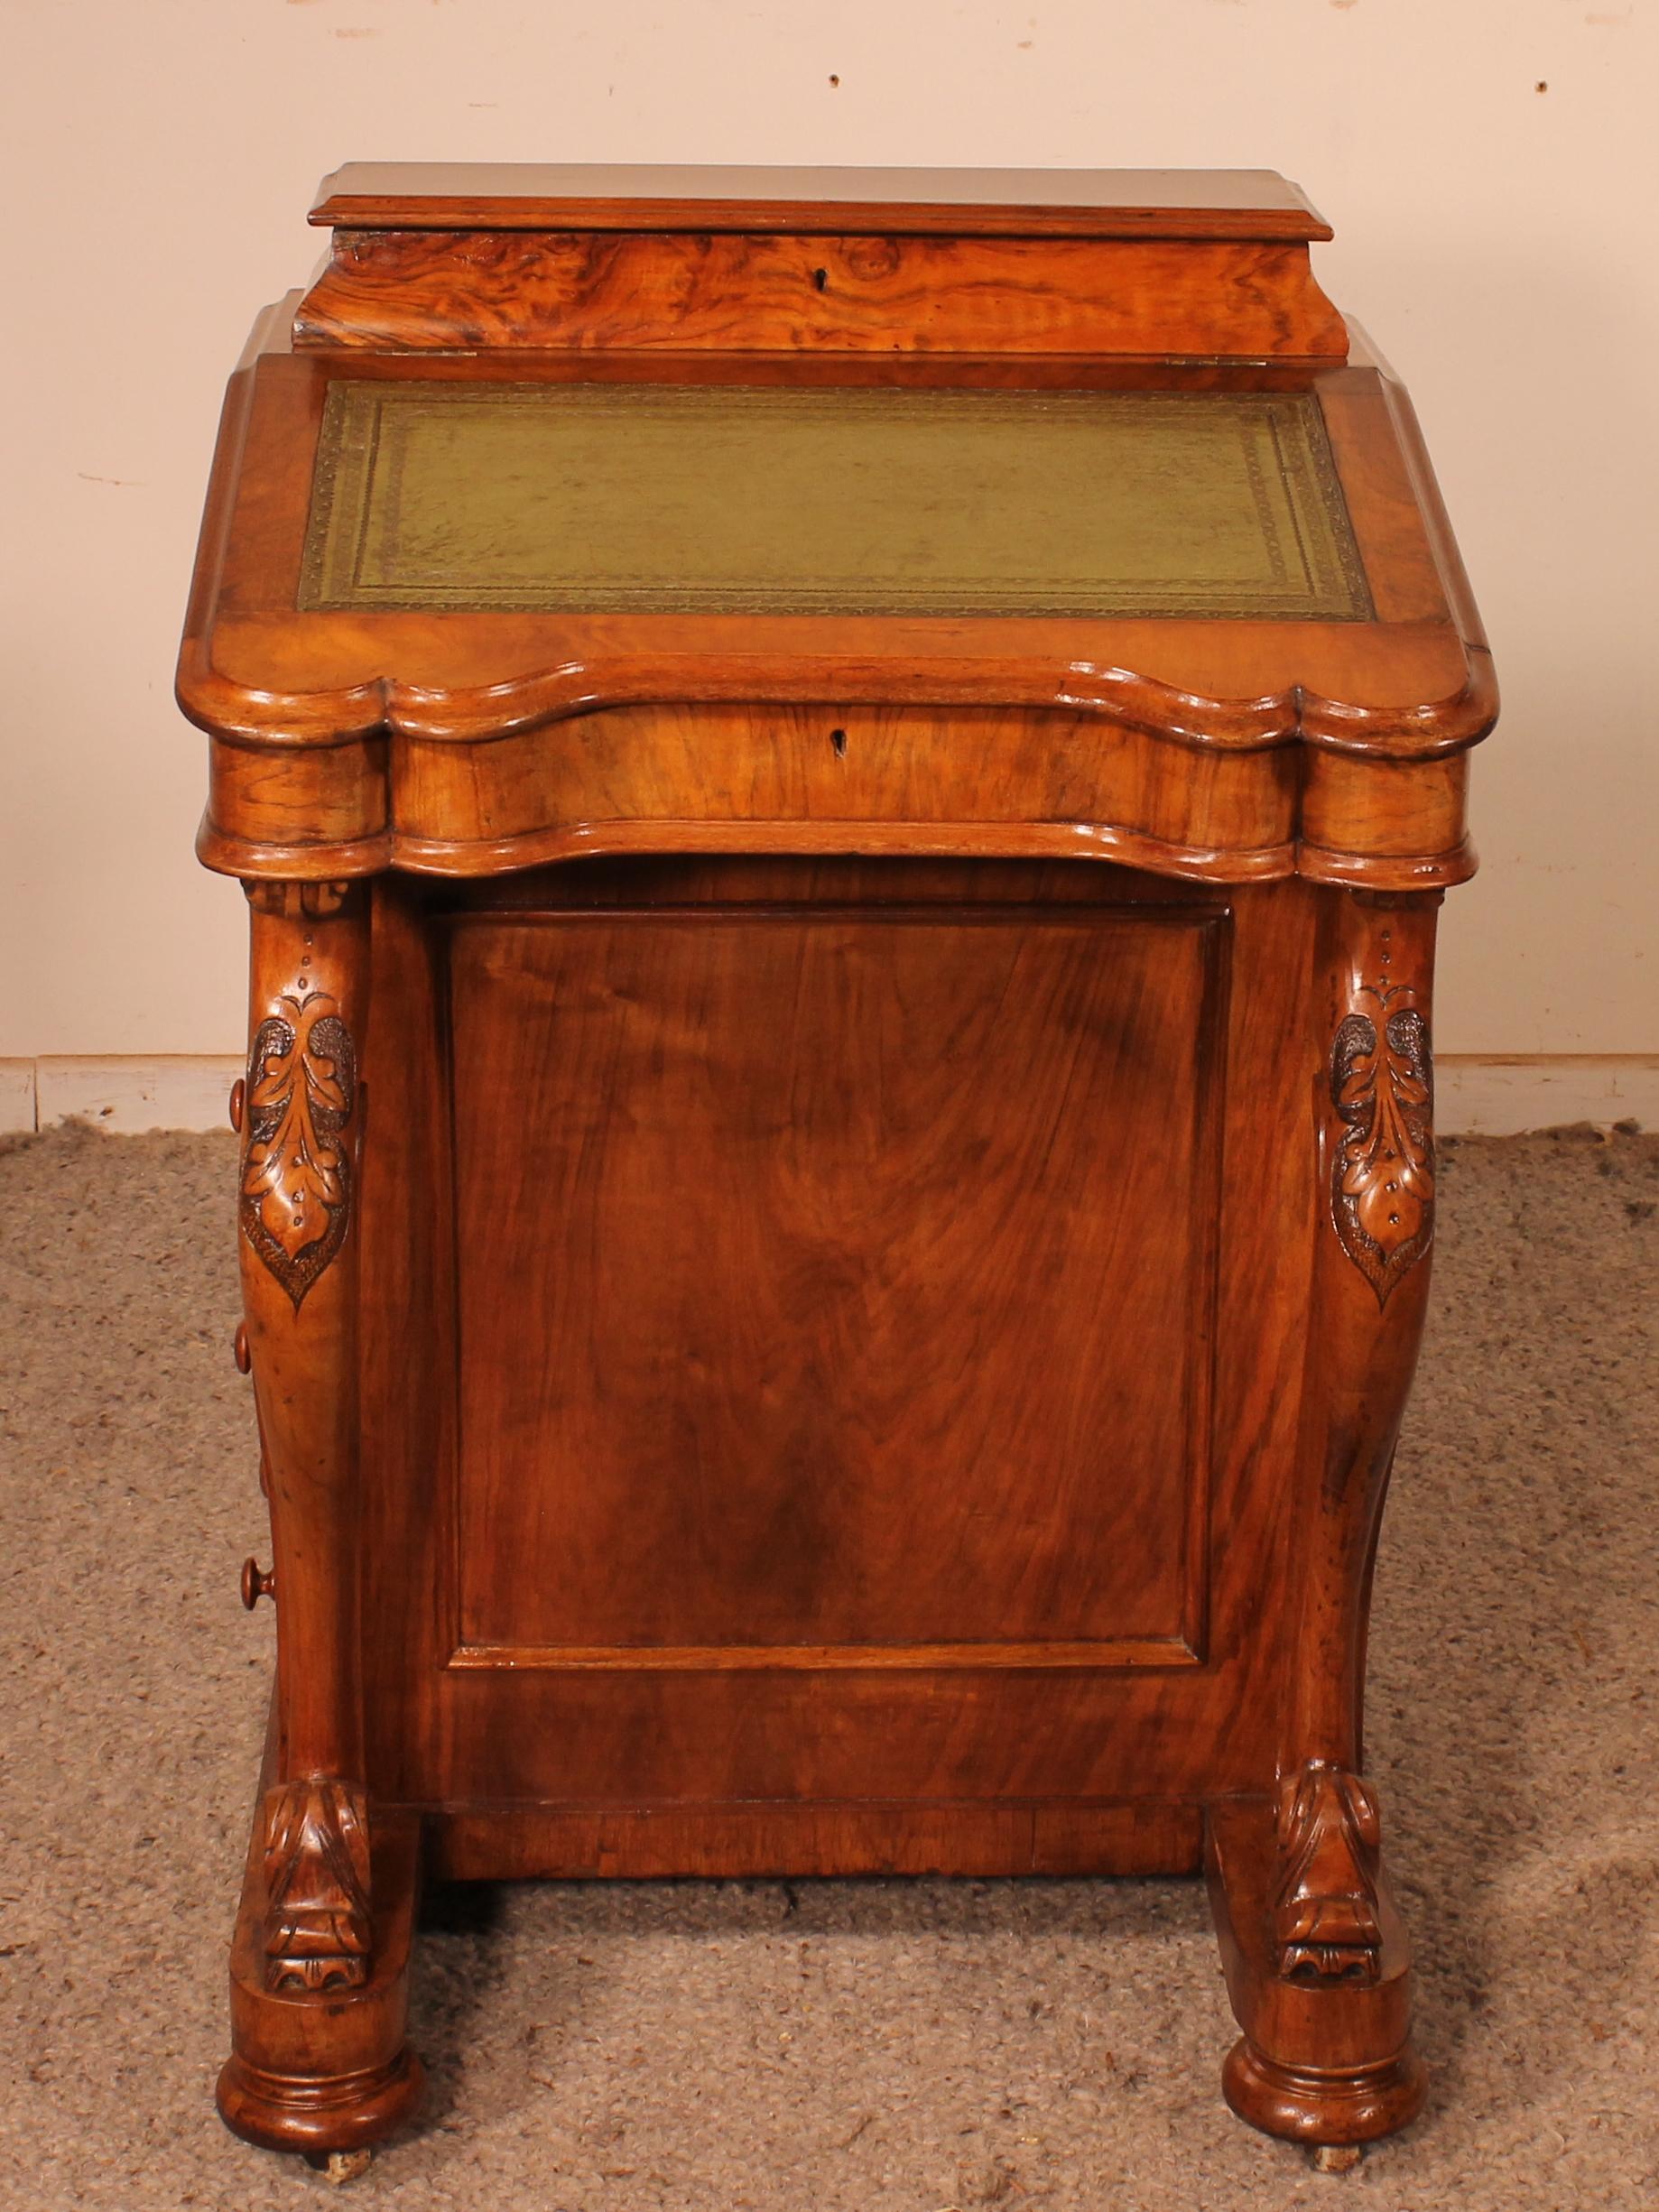 Superb Davenport in walnut and burl walnut from England from the 19th century V
ery elegant small travel desk in walnut and burl walnut which has a very elegant base
The right side of the cabinet reveals 4 drawers
Very pretty model
covered with